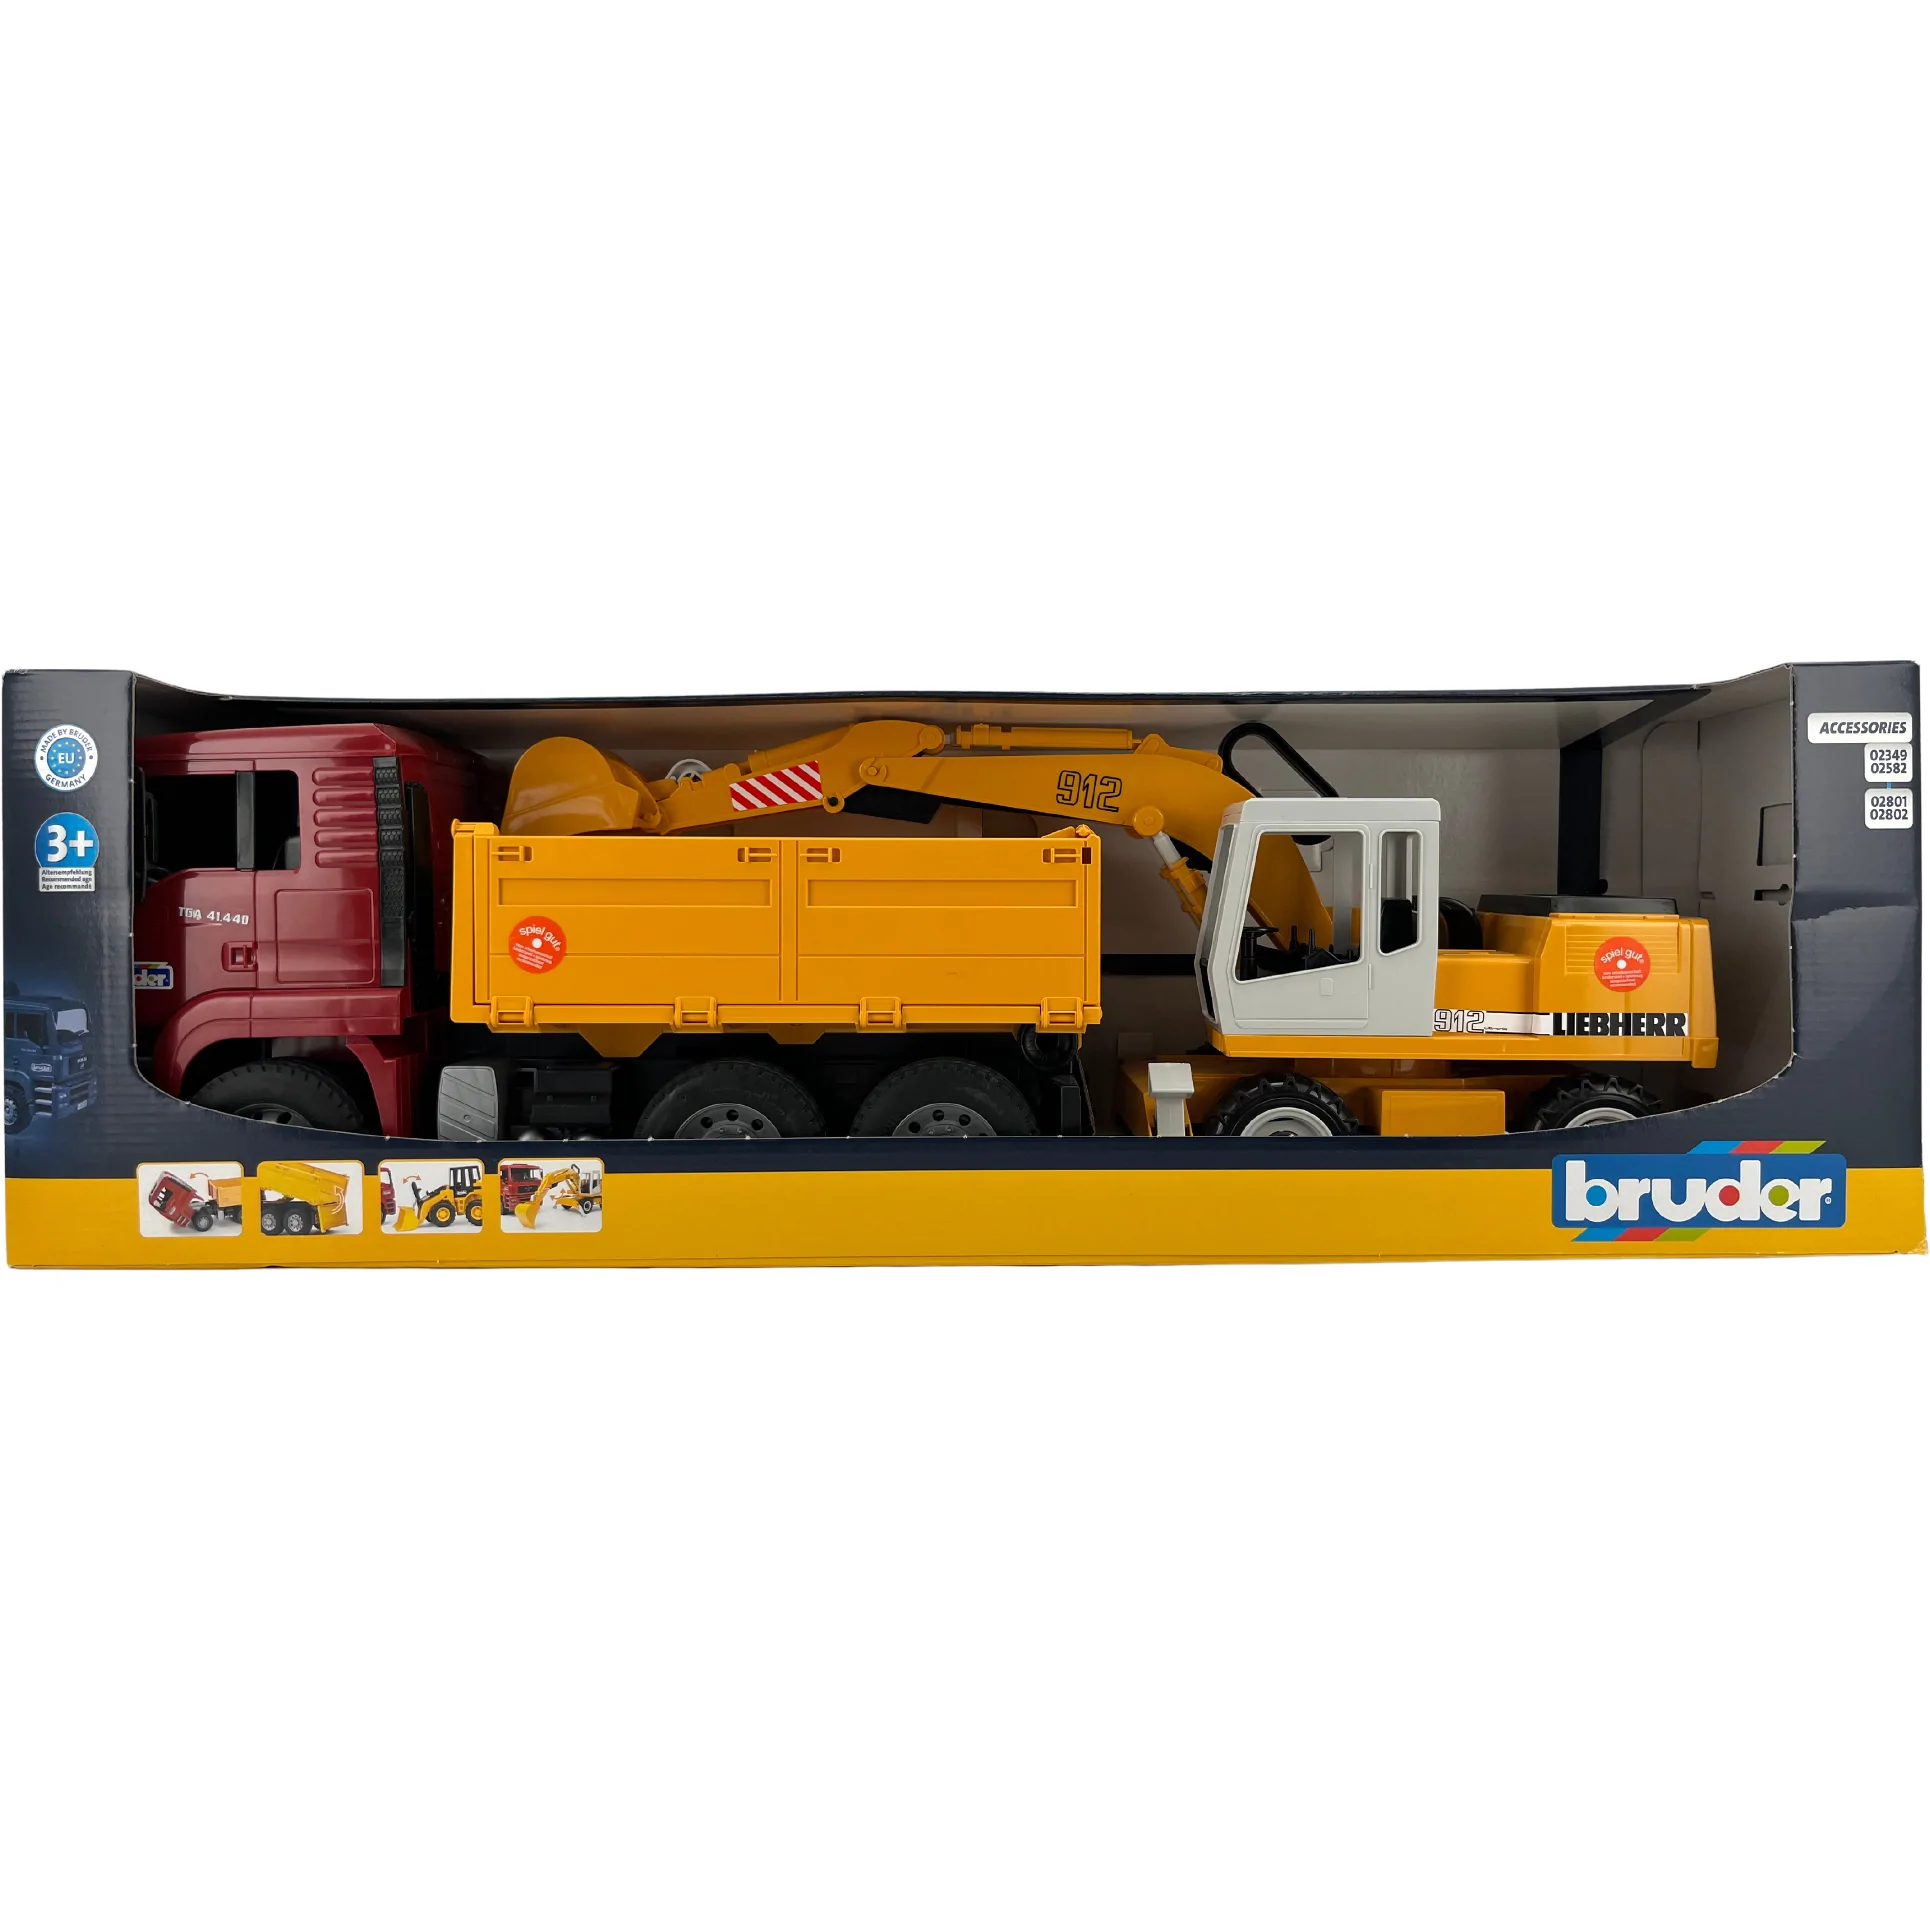 Bruder Trucks & Construction Toys / Truck with Dumping Bed / Excavator